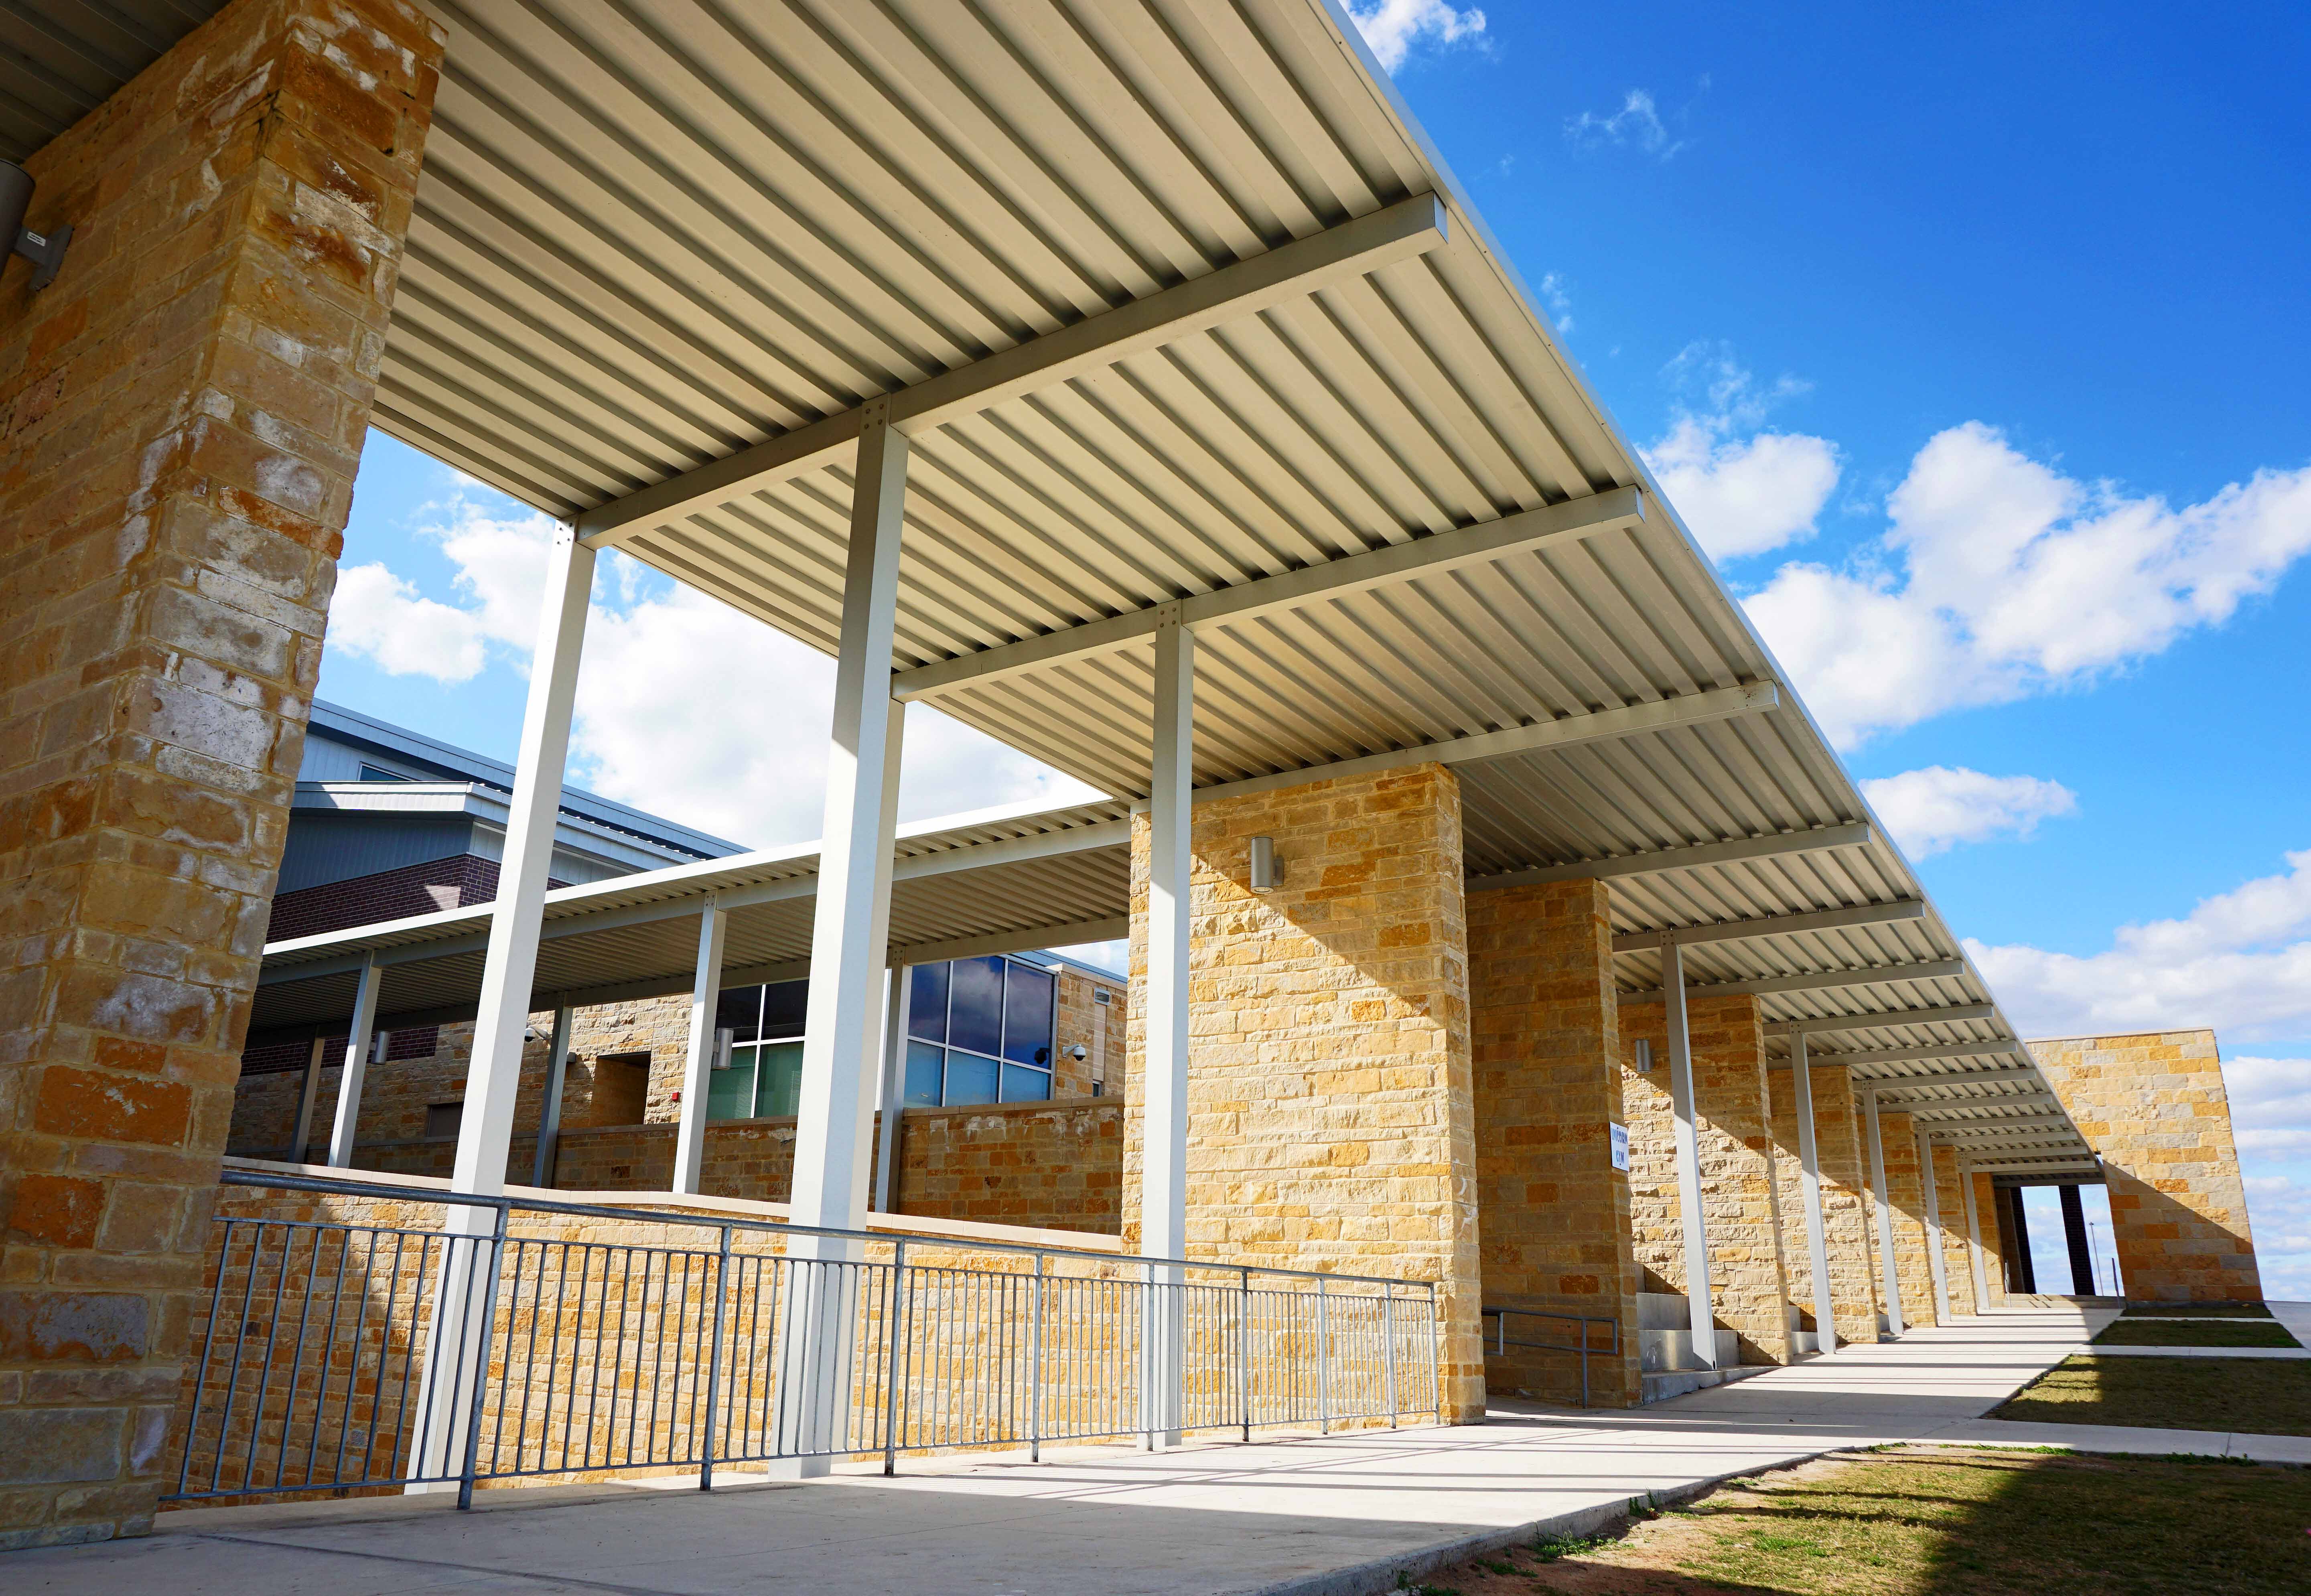 Architectural Canopies and Awnings | PSE Consulting Engineers, Inc.